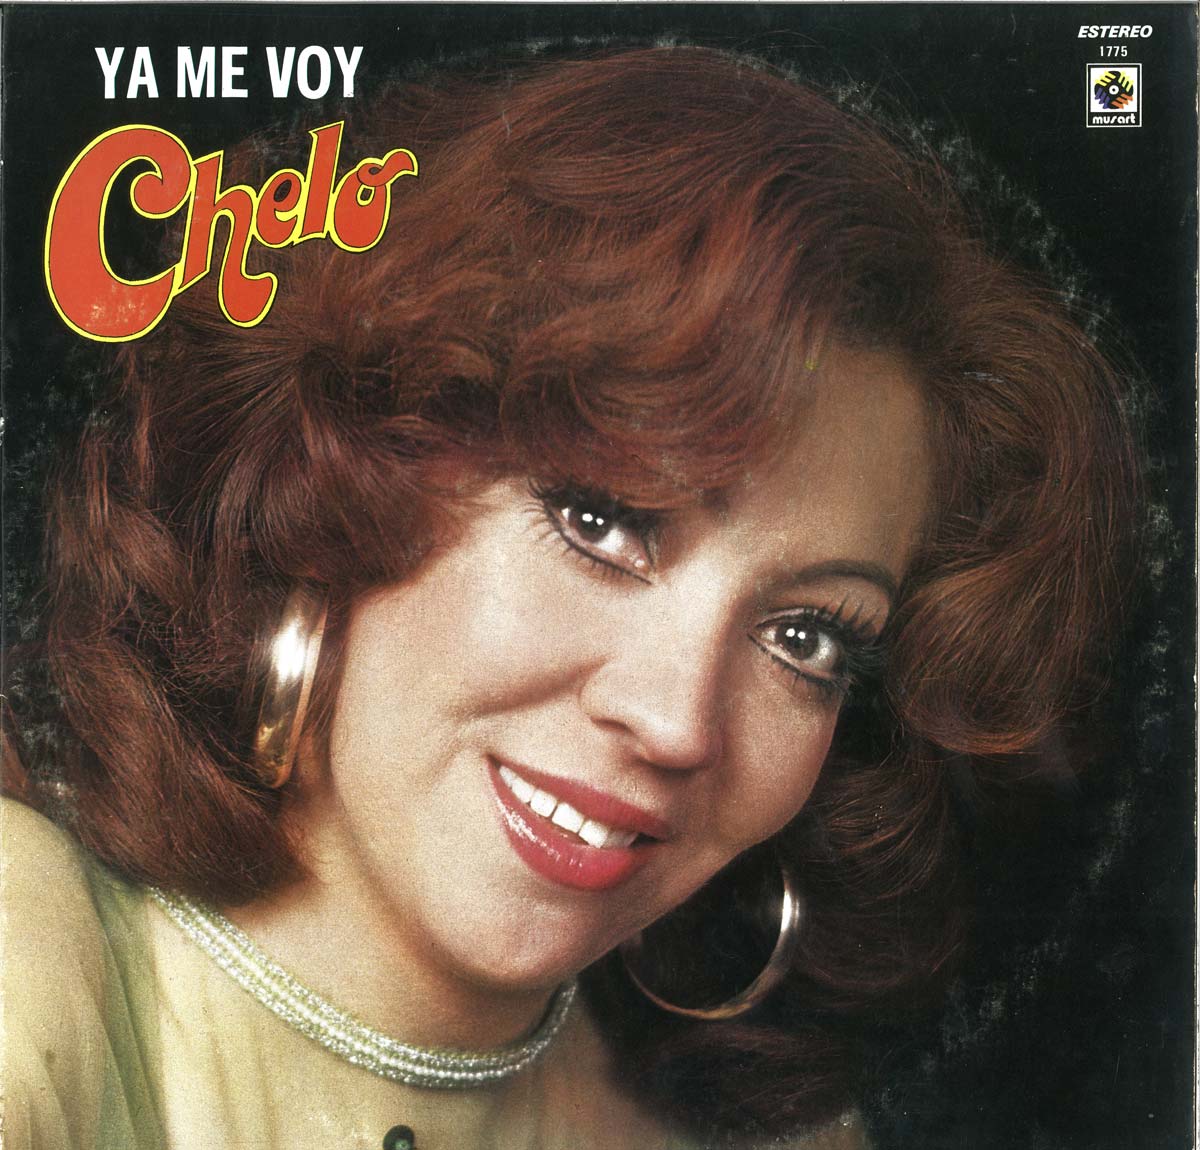 Featured Image for “Ya Me Voy”